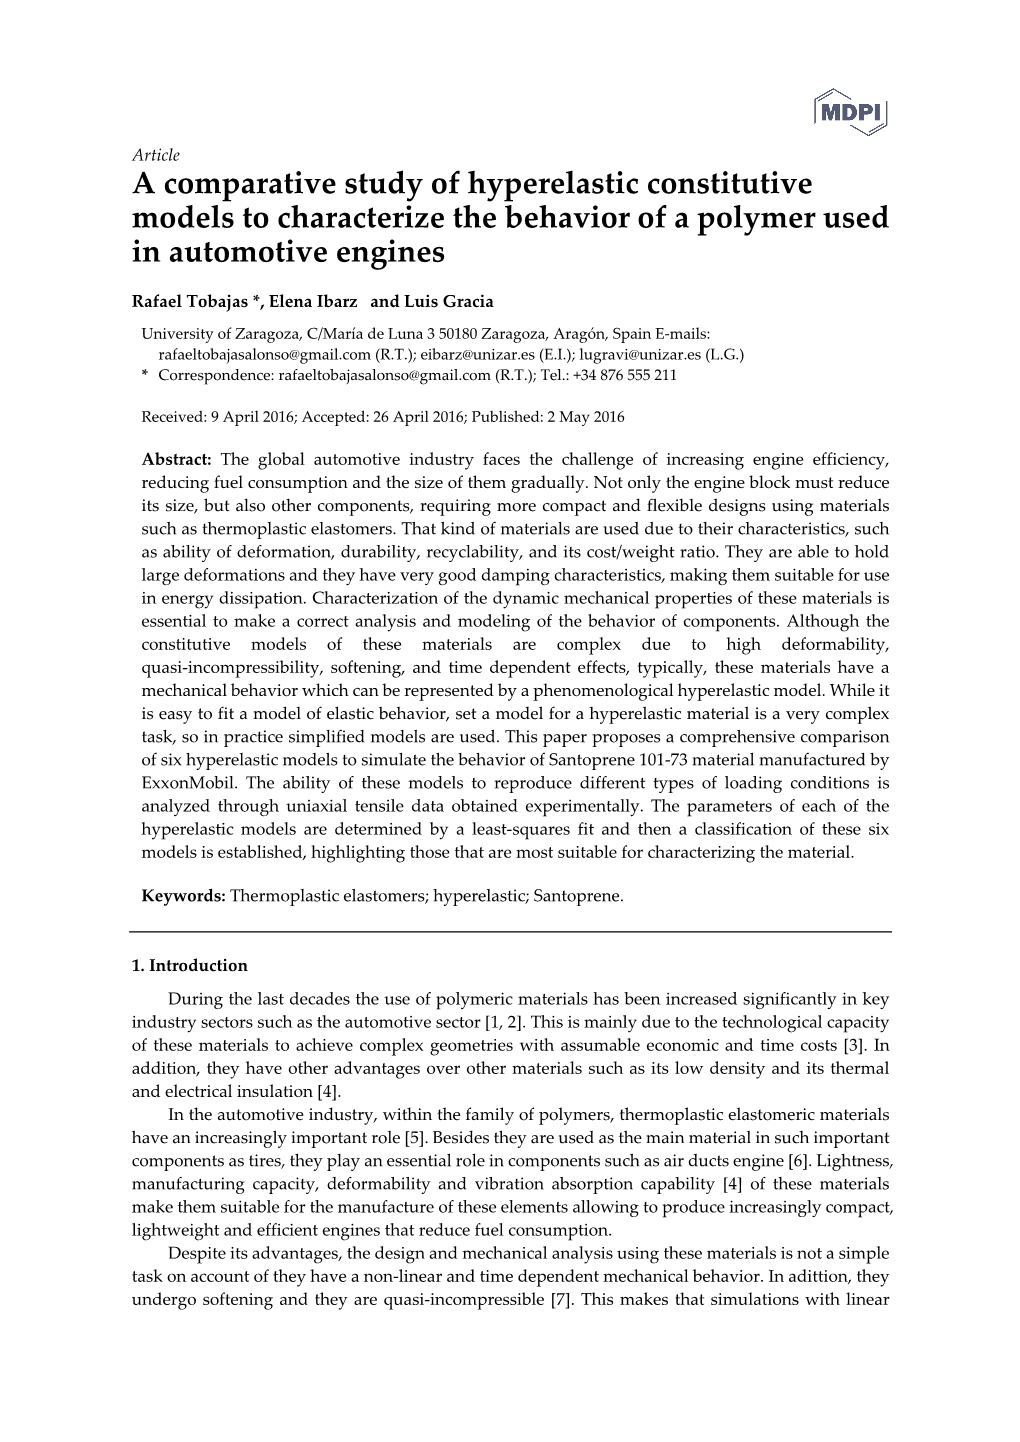 A Comparative Study of Hyperelastic Constitutive Models to Characterize the Behavior of a Polymer Used in Automotive Engines